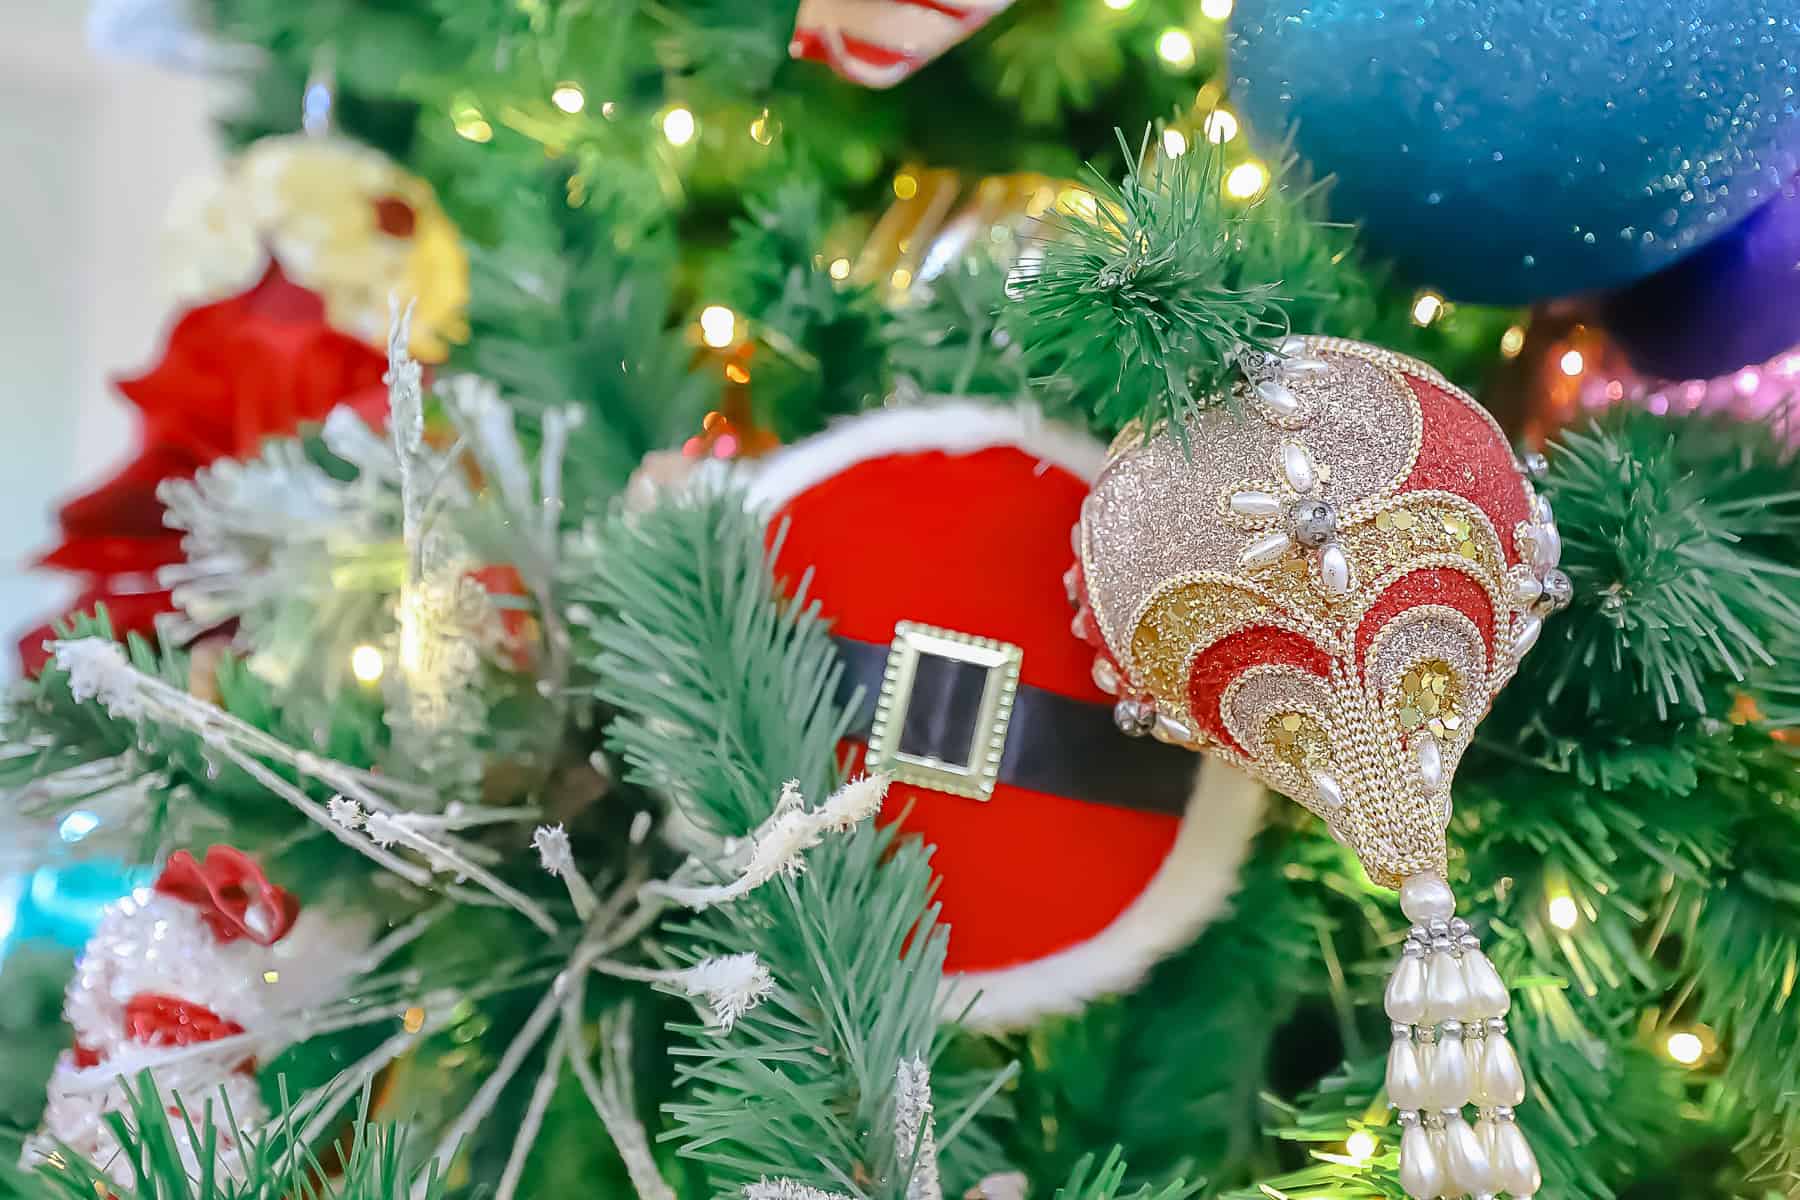 tree ornaments that look like Santa Clause and a hot air balloon shape